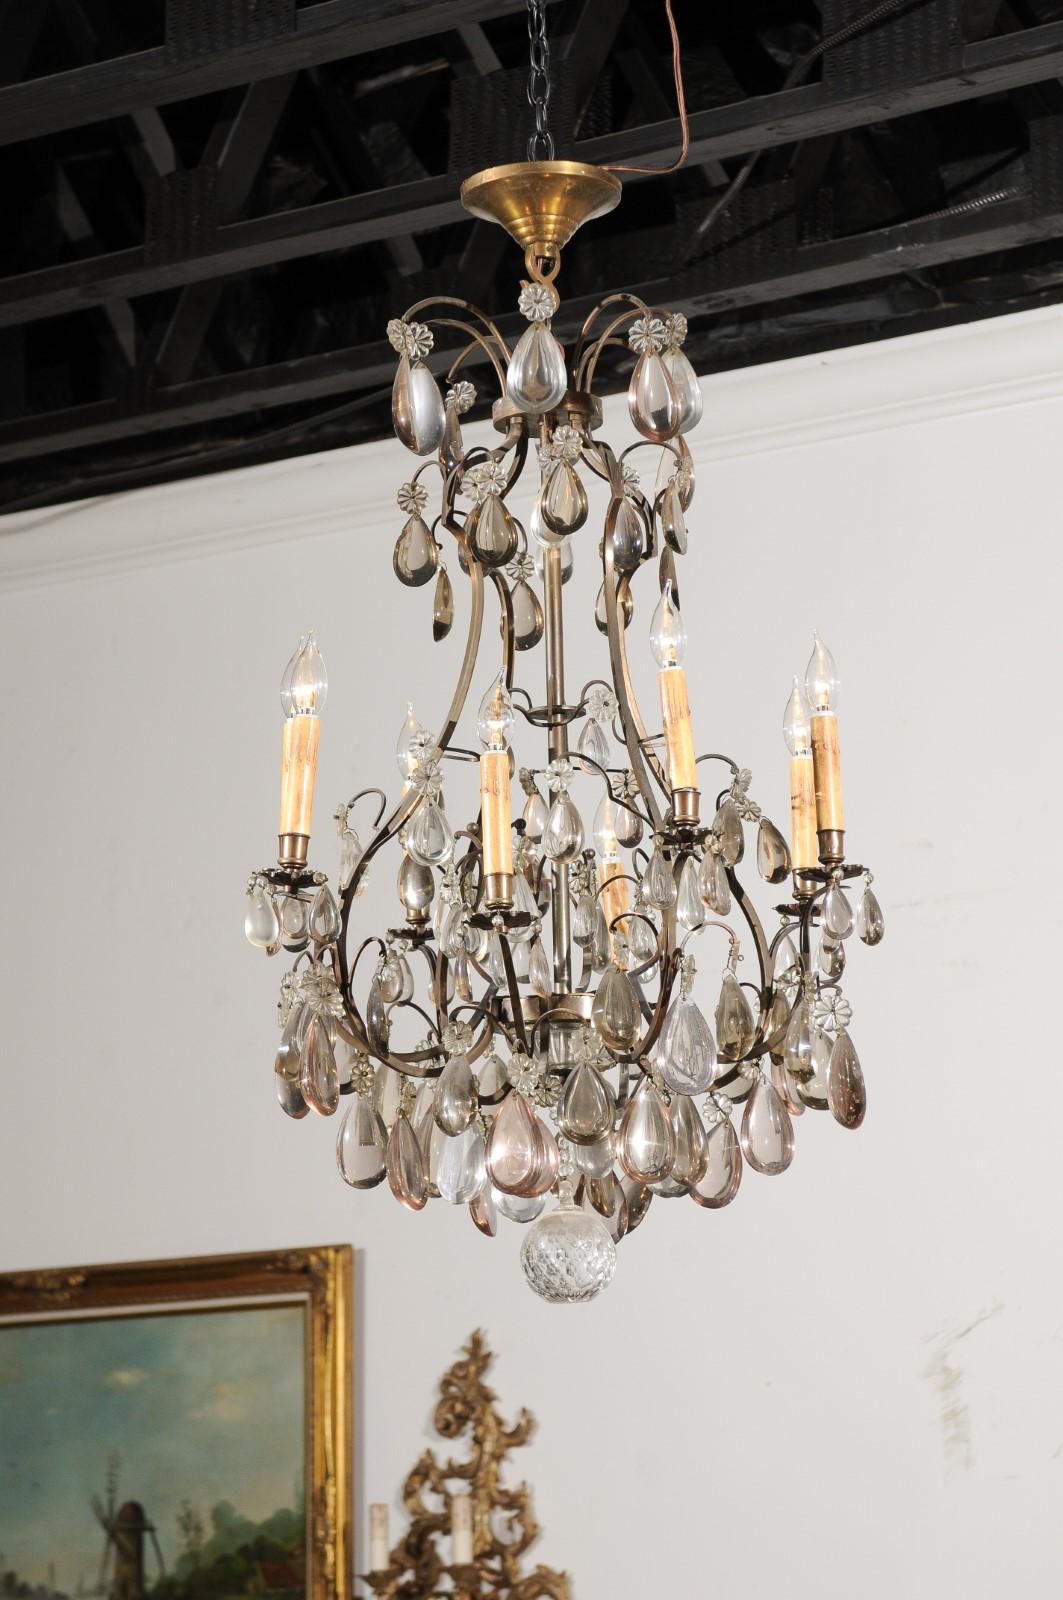 A French eight-light crystal chandelier from the late 19th century, with steel armature and smoky crystals. Born in France during the Belle Époque era, this exquisite chandelier features a scrolling steel armature supporting a variety of clear and